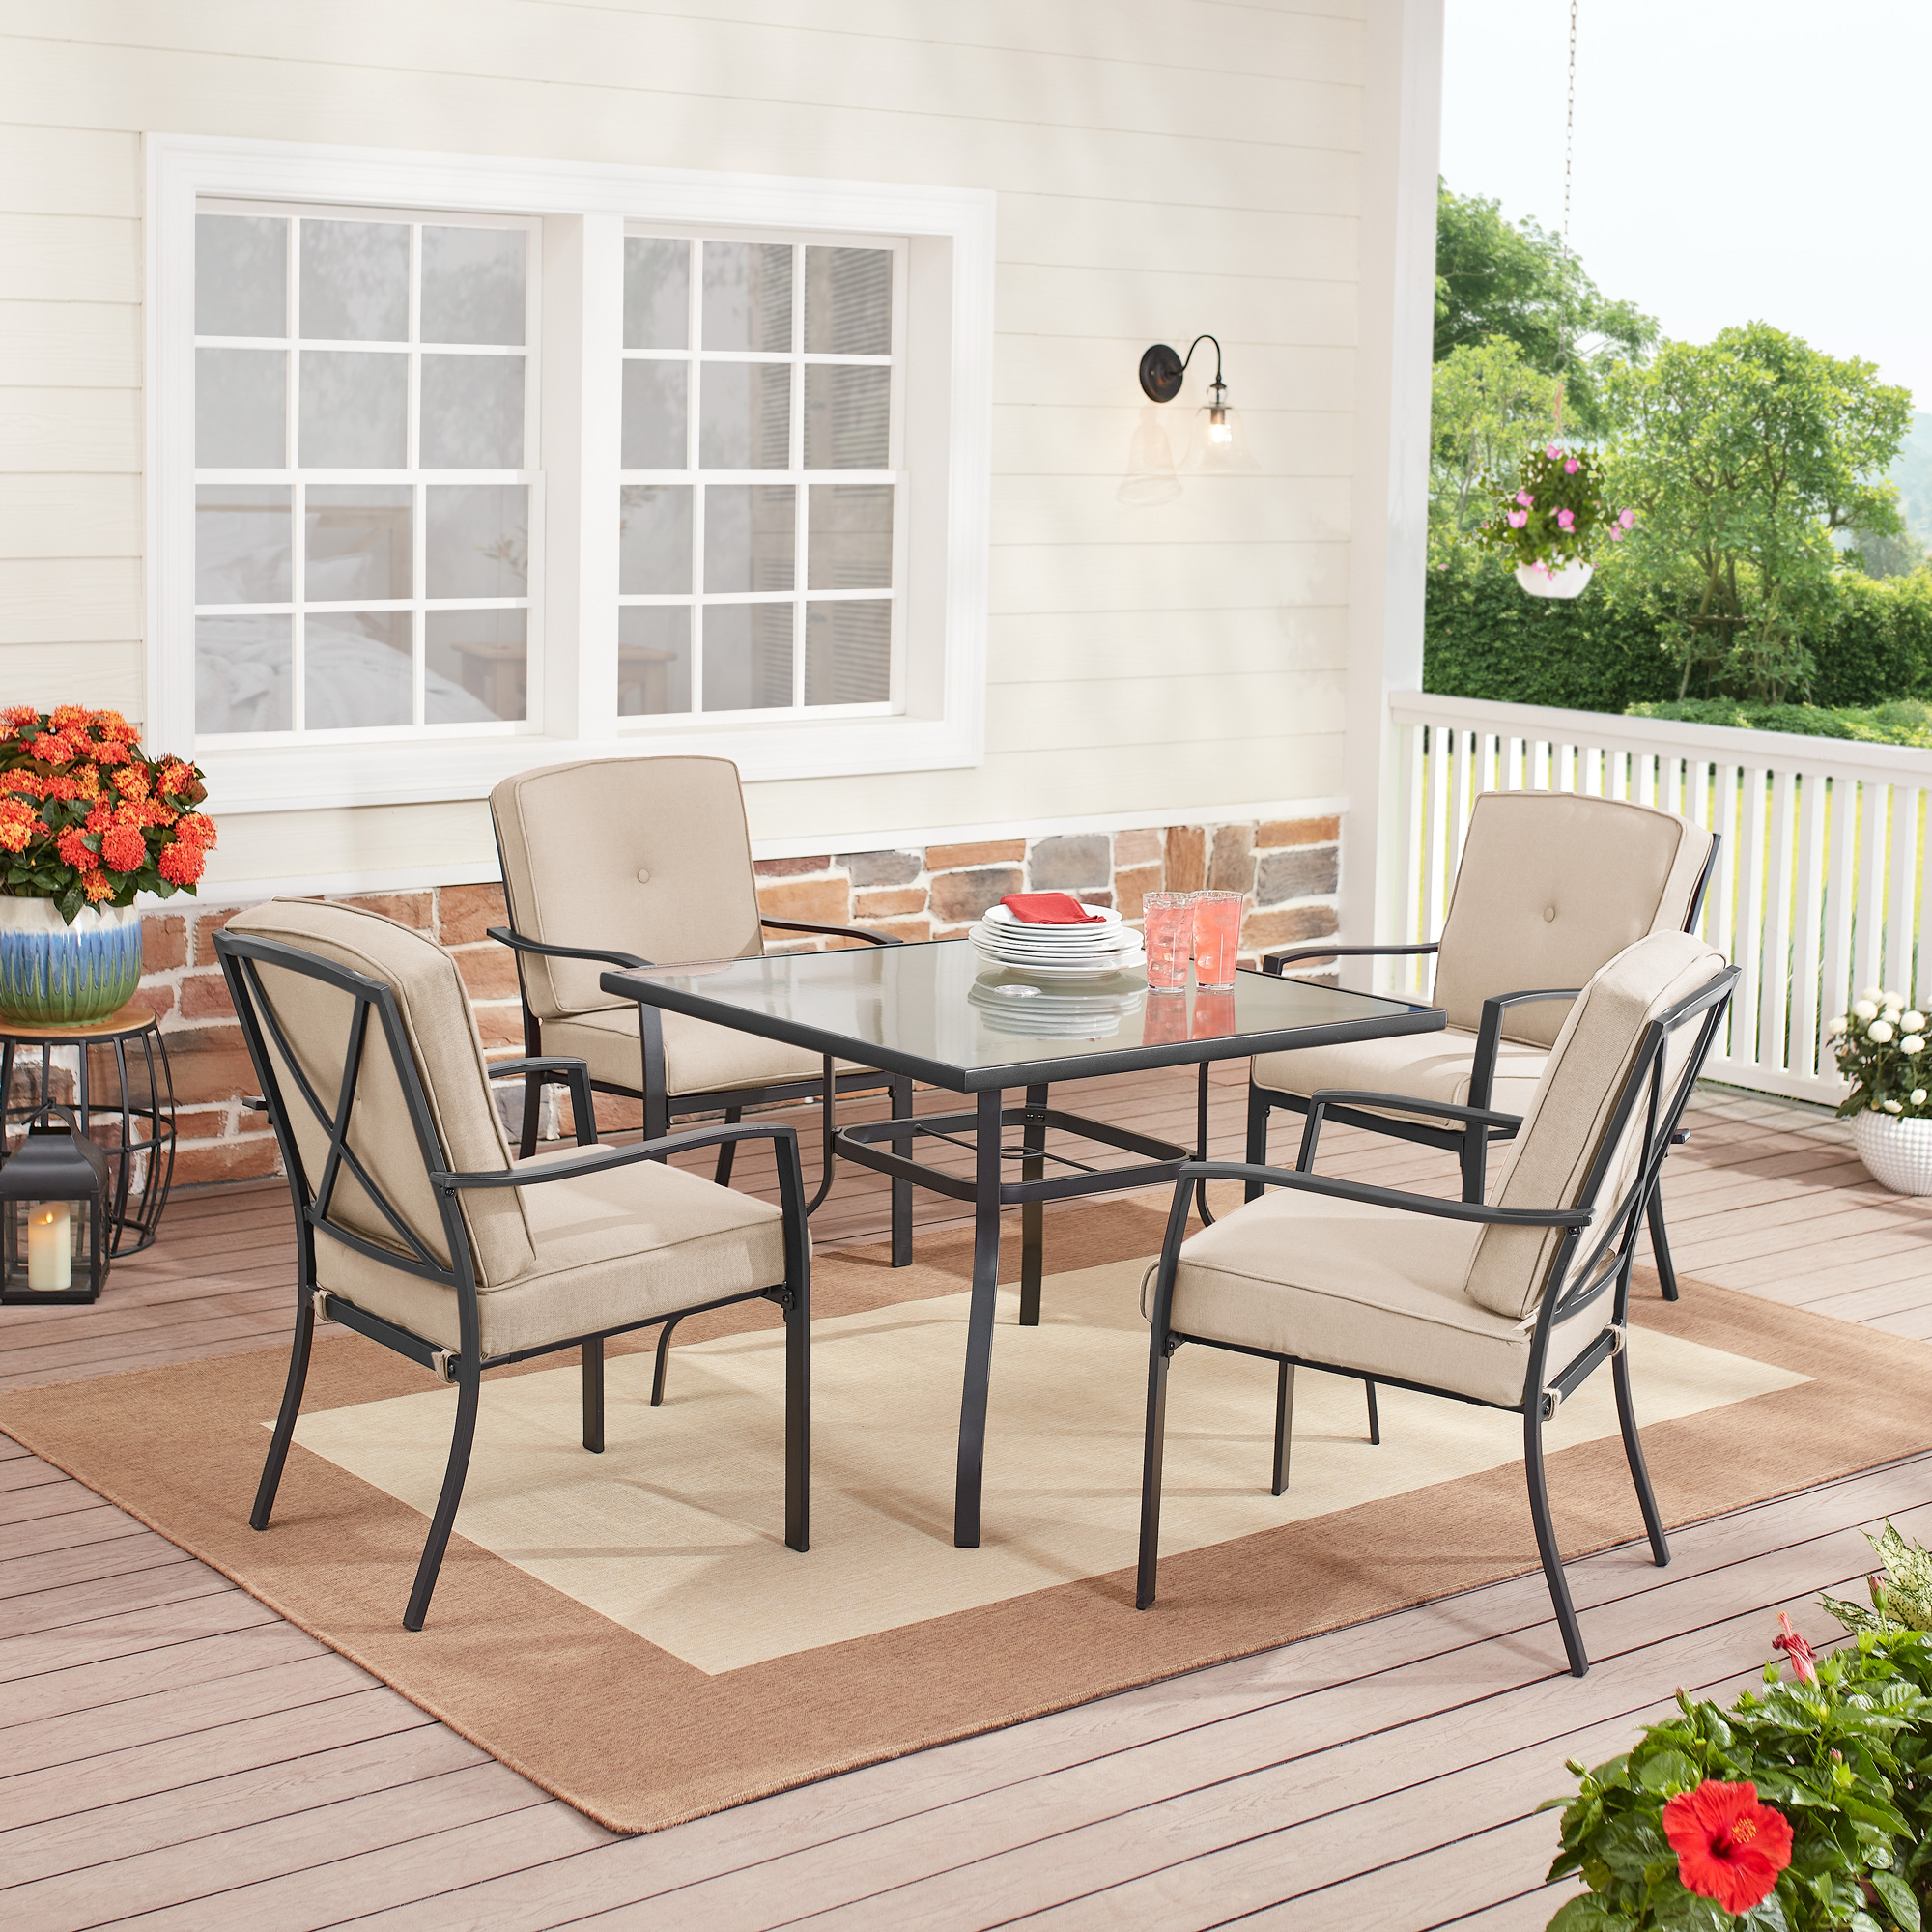 Mainstays Forest Hills 5 Piece Patio Dining Set - Beige - image 1 of 1